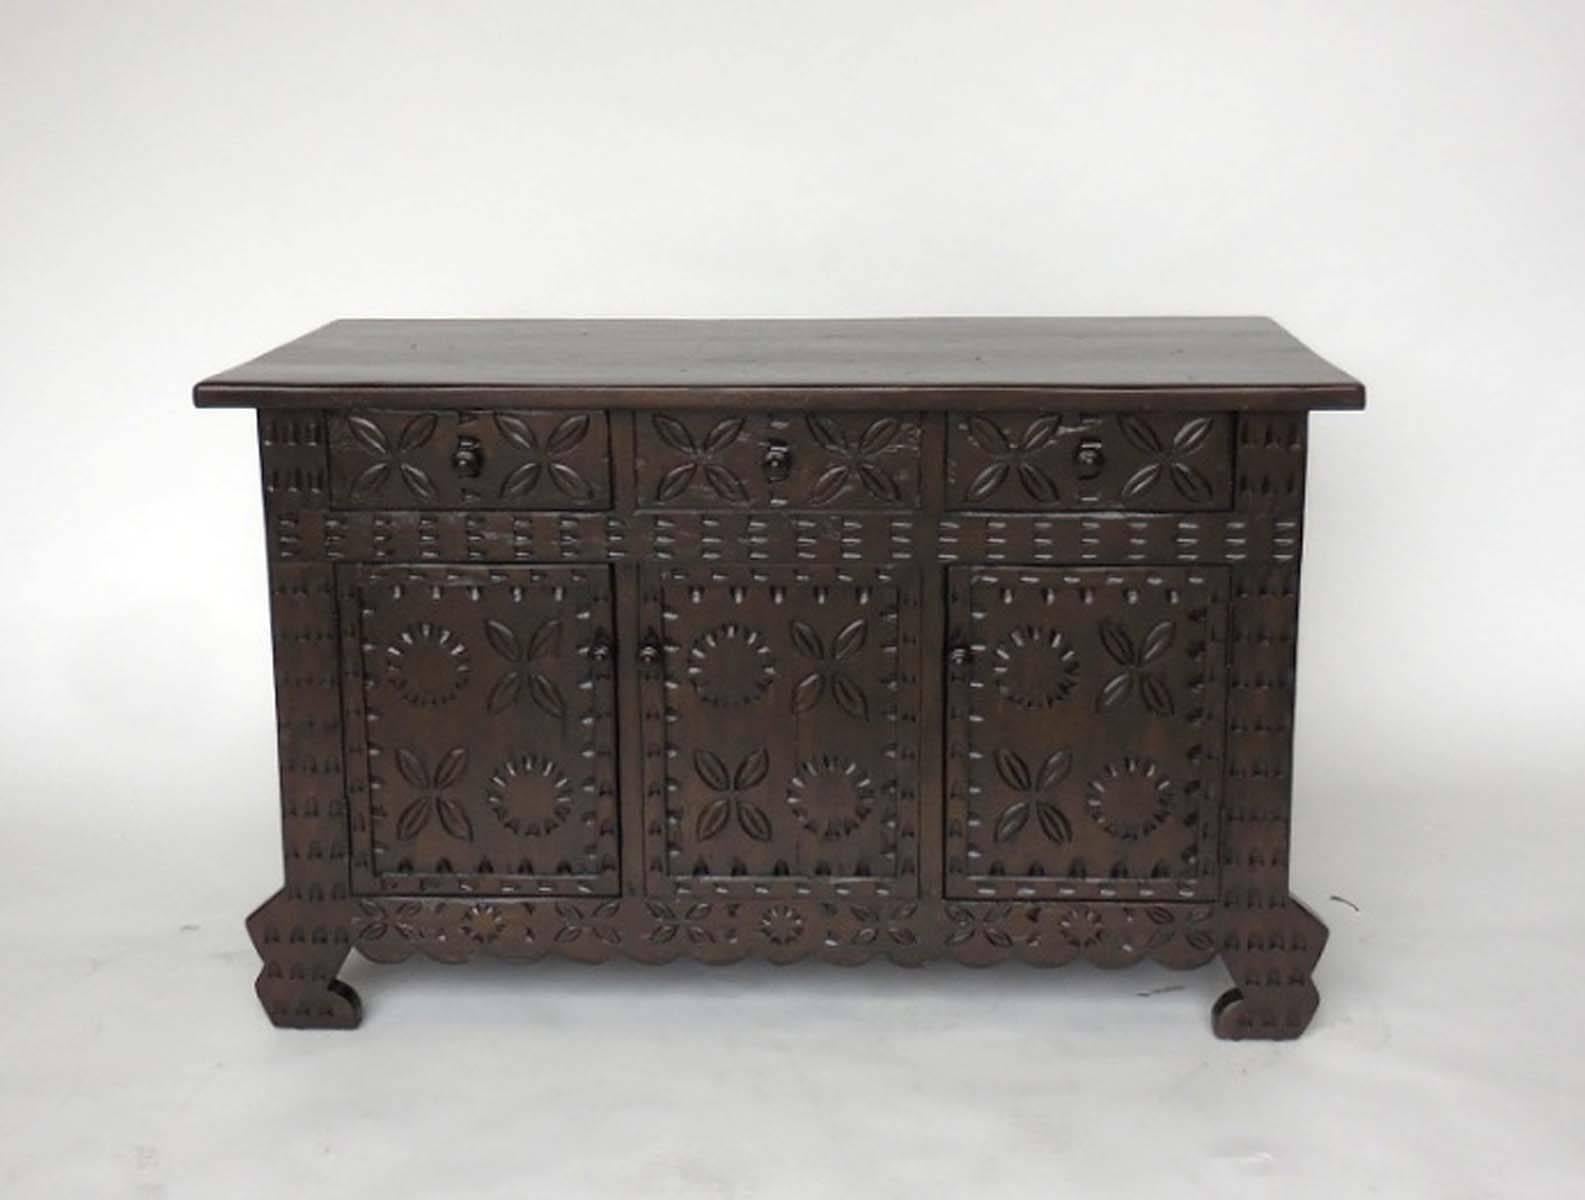 Custom carved cabinet shown here in walnut #3 with light distress. Can be made in any size and finish, in walnut. Carvings on three sides.
Handmade in Los Angeles by Dos Gallos Studio.
PRICES ARE SUBJECT TO CHANGE. PLEASE INQUIRE BEFORE PLACING AN